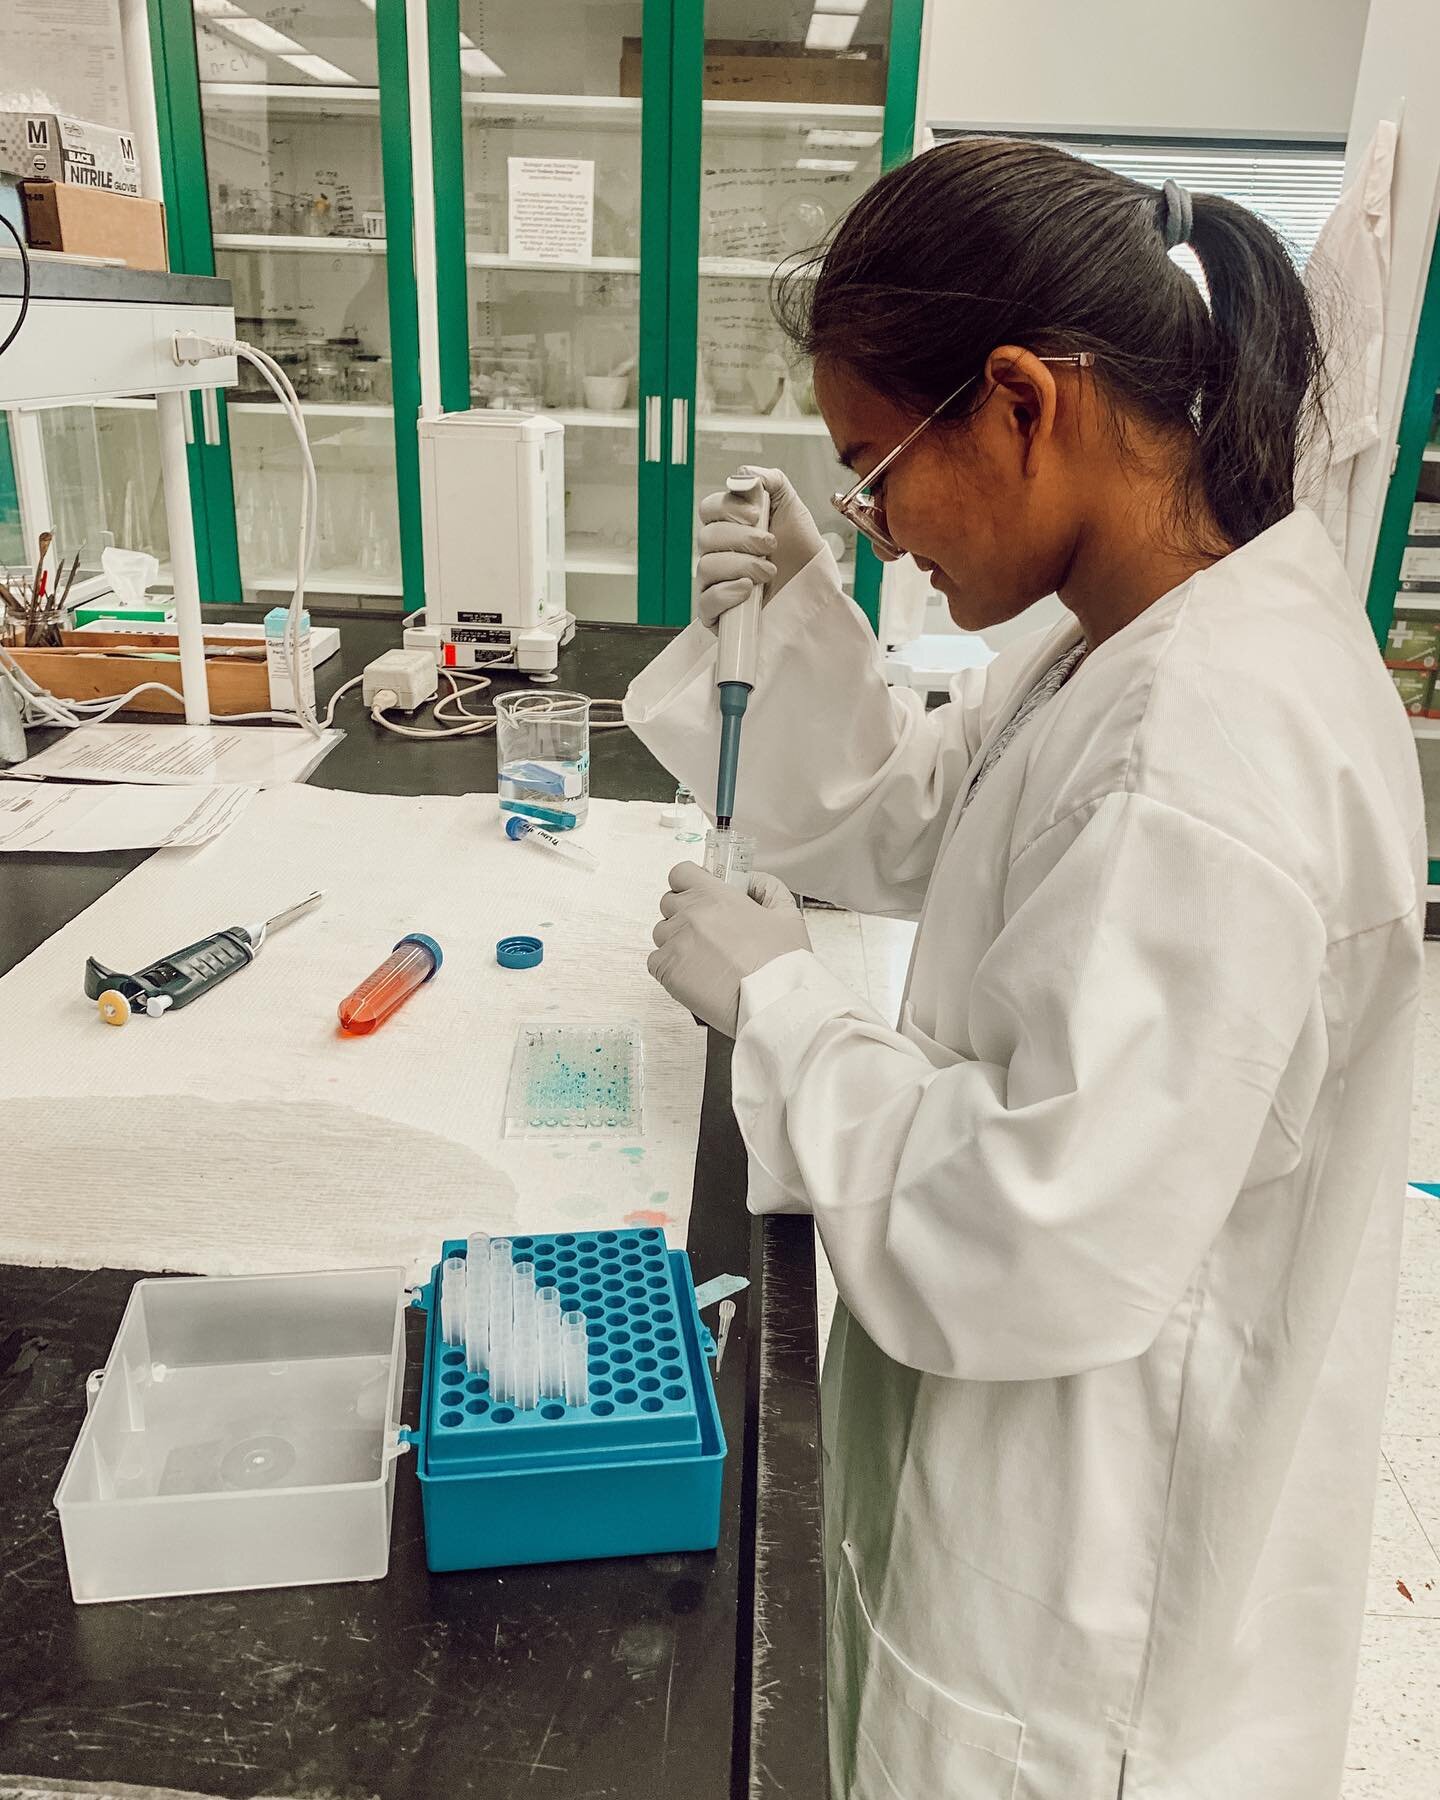 One of our favorite things about the undergraduate polymer science &amp; engineering degree here at USM is that our undergrads get to work in the labs in their first year! Here @j_ess_ica12 is working in the @clemonslab practicing her pipetting skill